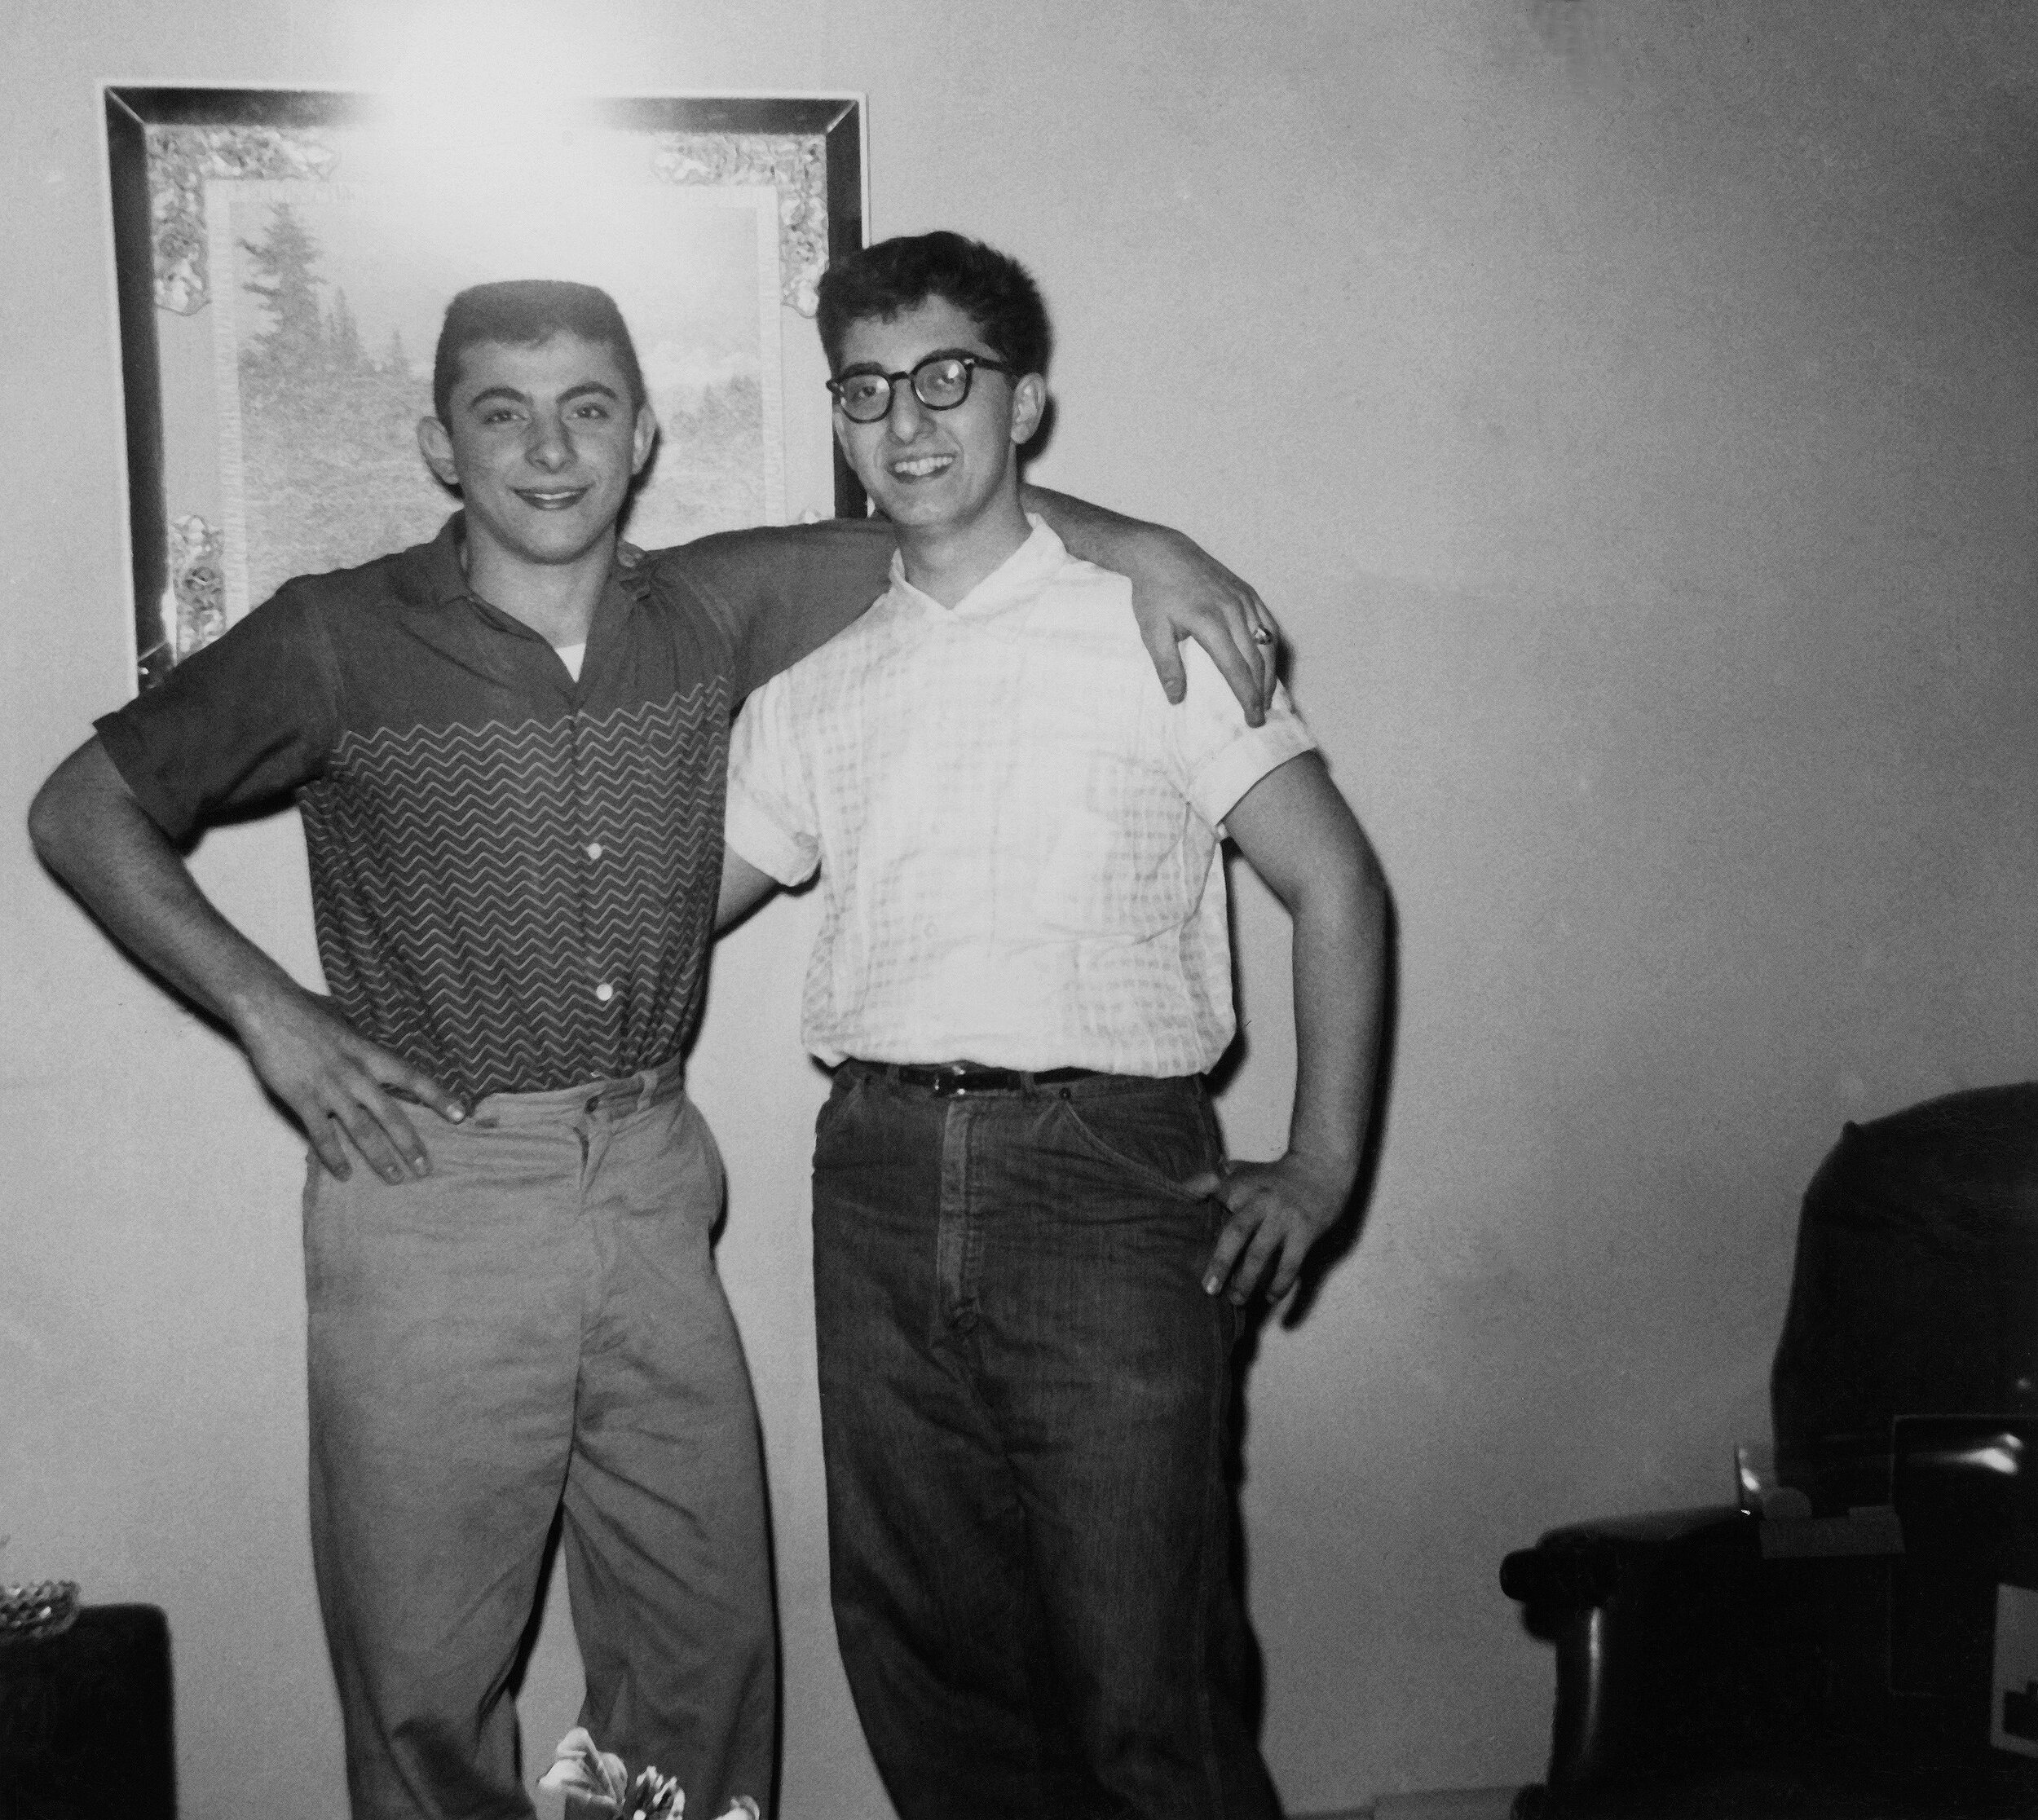  Joe and Marco, 1956, a couple of years after the "rat" incident 